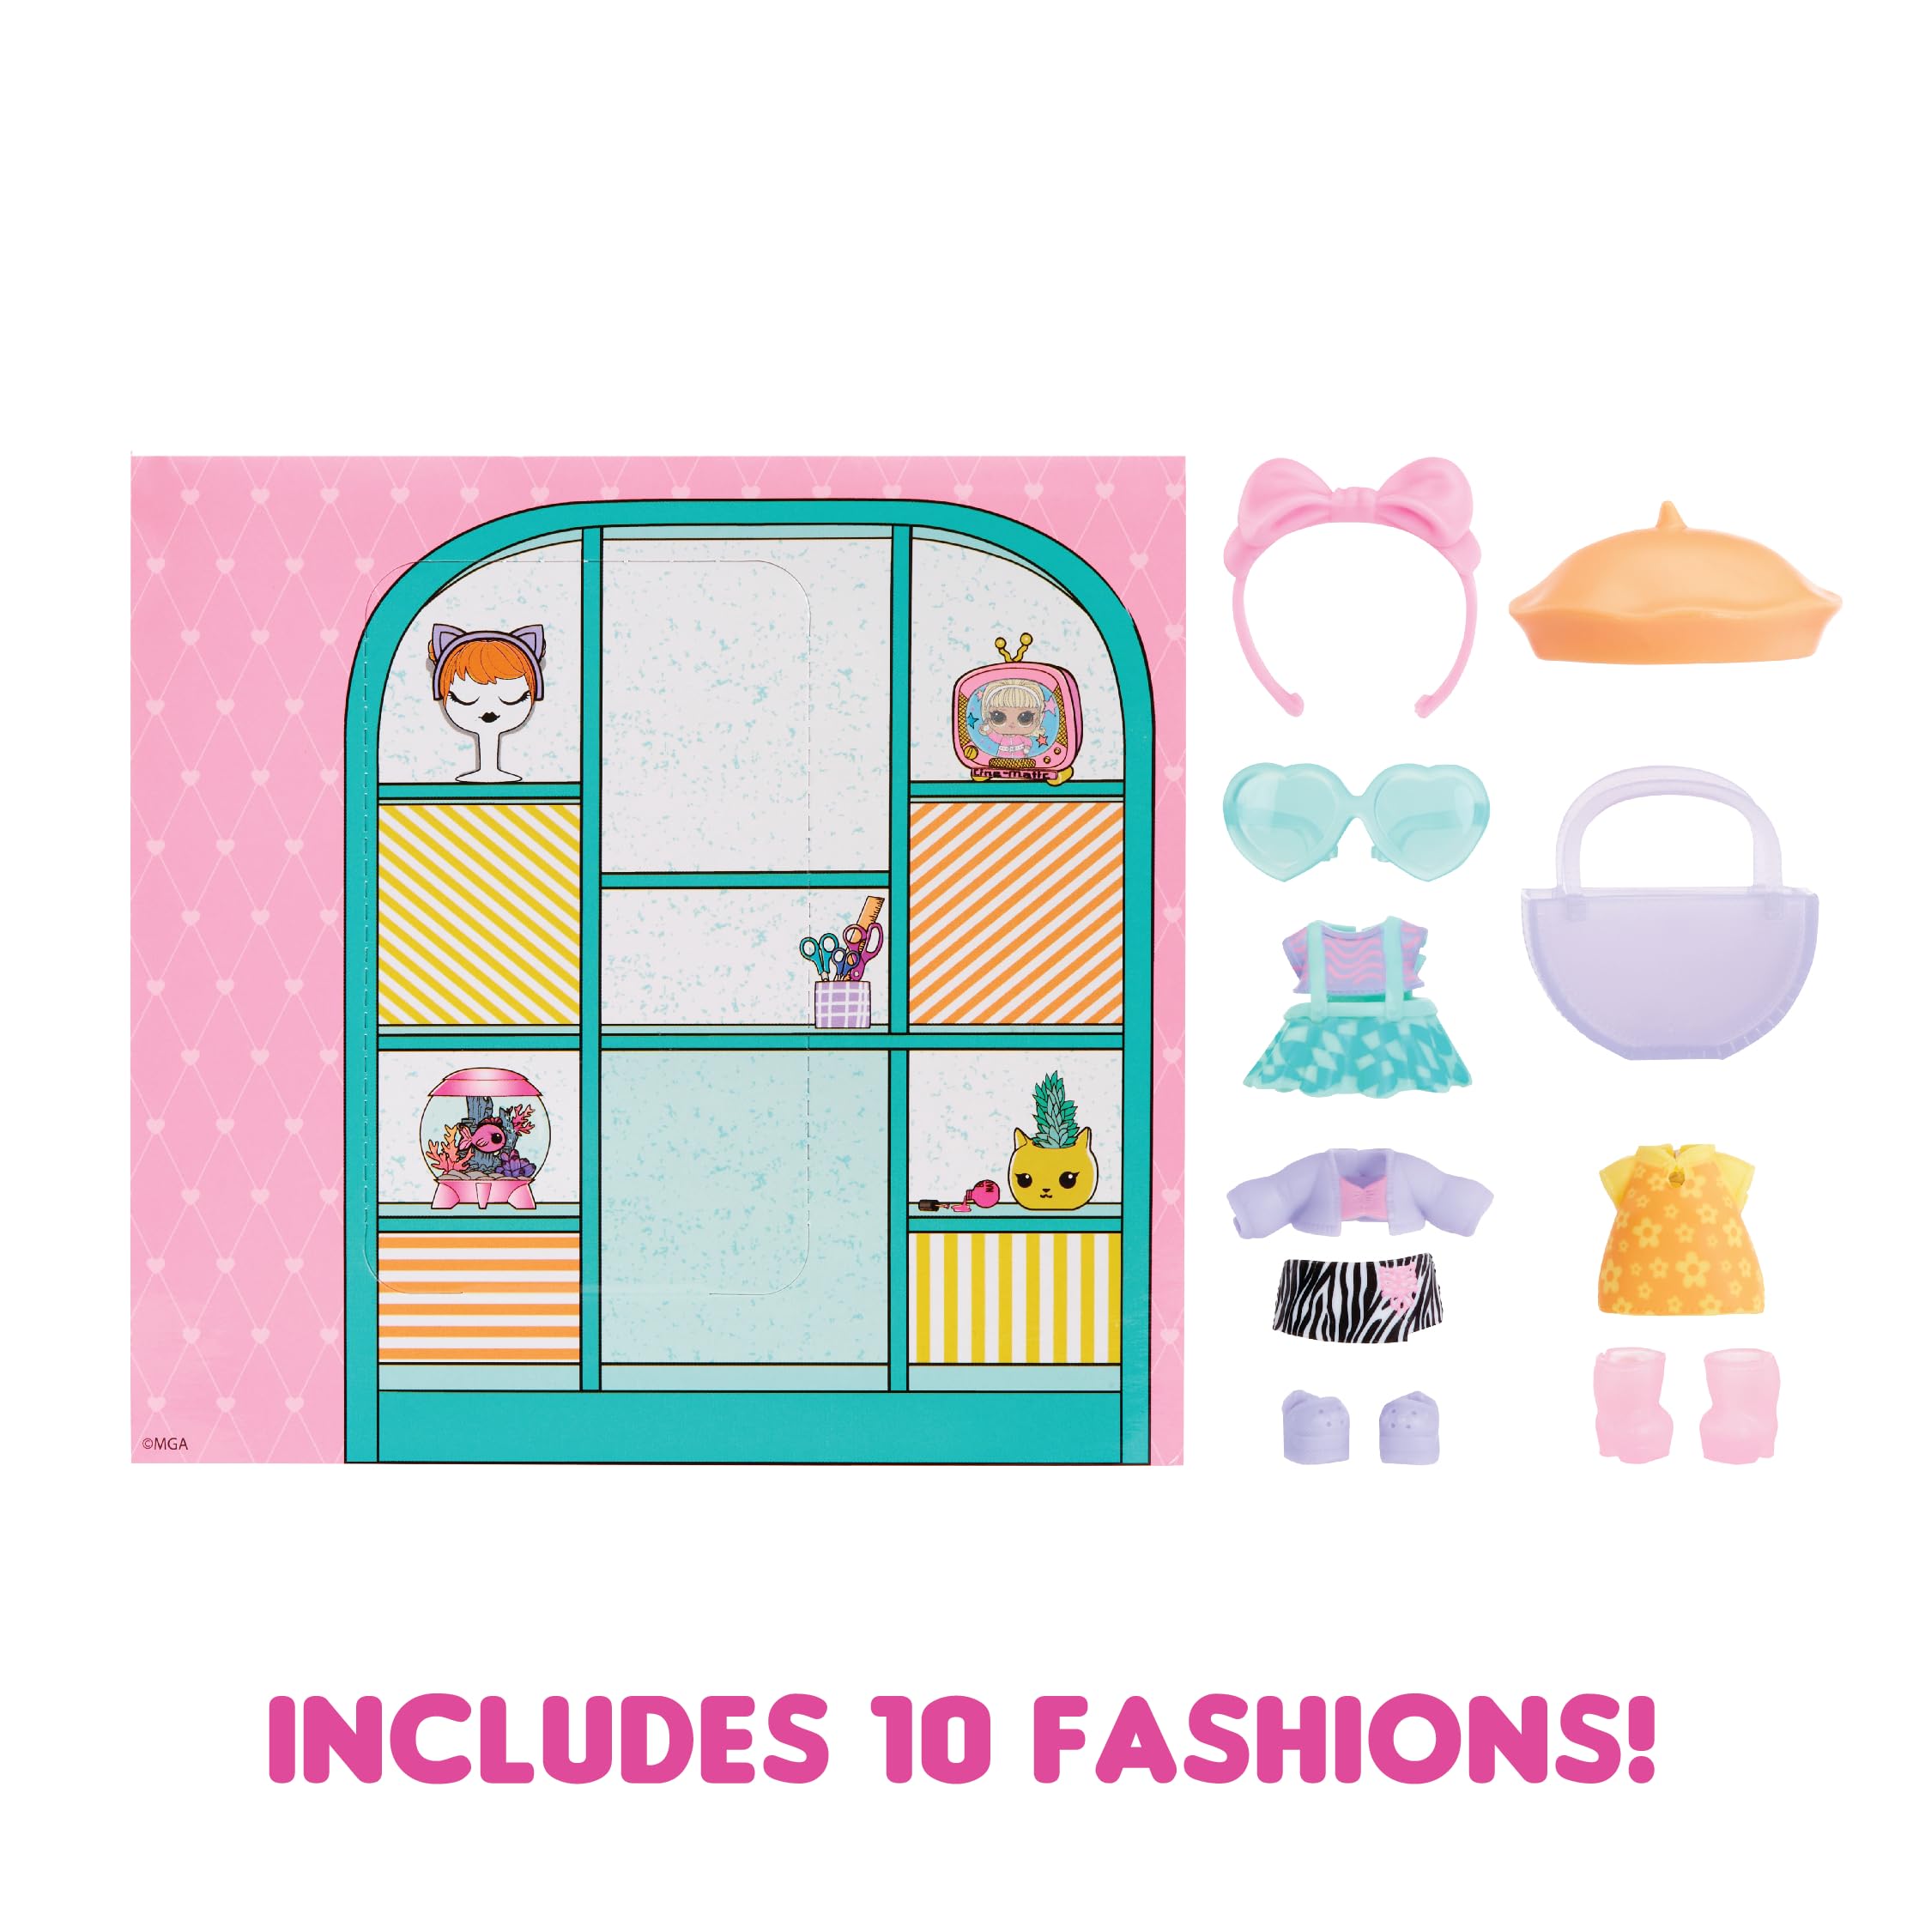 LOL Surprise Fashion Packs Spring Style - 6 Unique Styles Each with (3) Outfits, (2) Pairs of Shoes, (4) Accessories – Mix and Match Styles to Create Tons of New Looks - Great Gift for Girls Age 4+